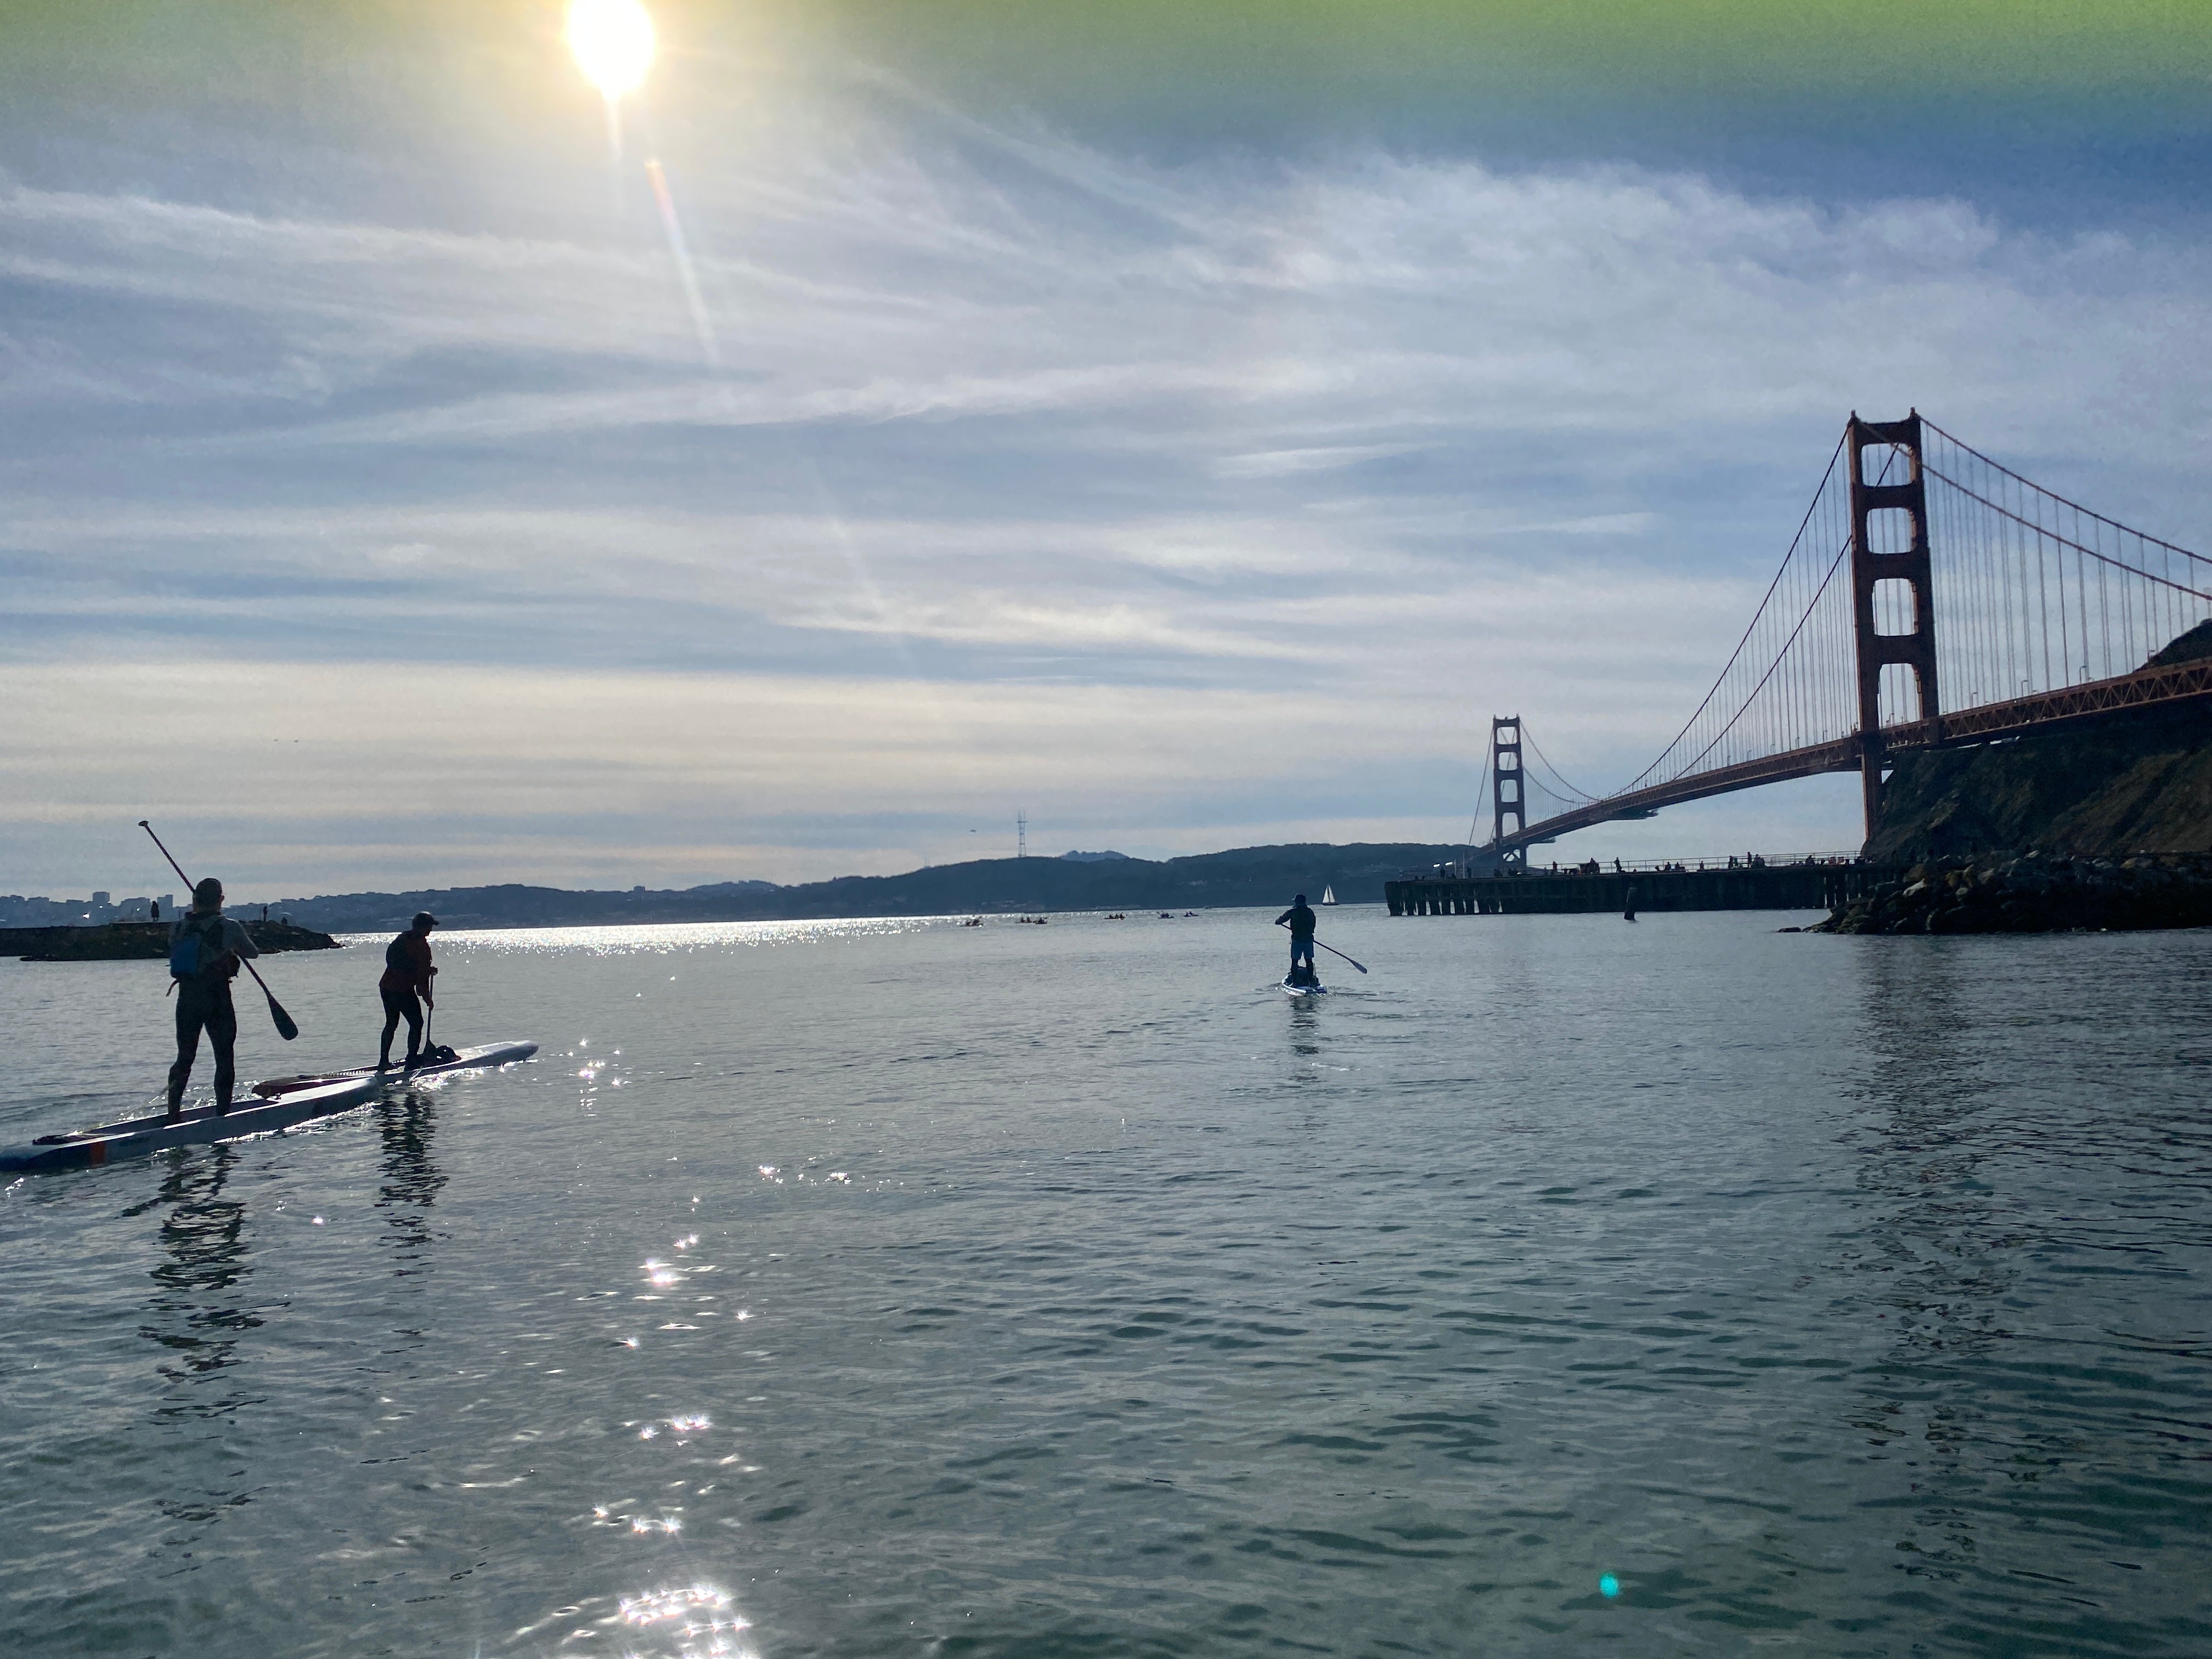 SUP paddle boarders in San Francisco bay